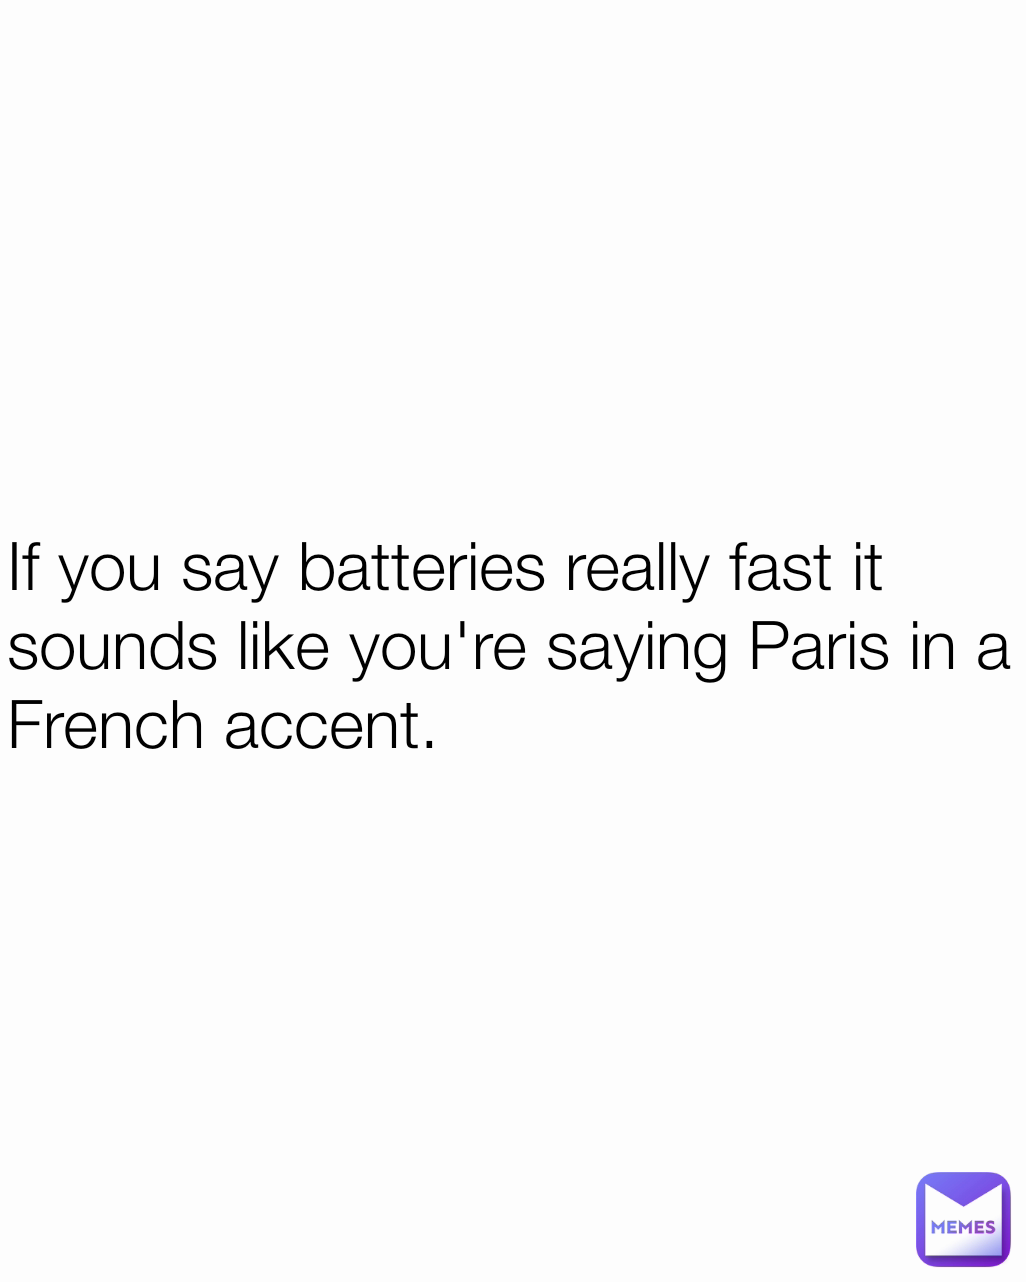 If you say batteries really fast it sounds like you're saying Paris in a French accent.